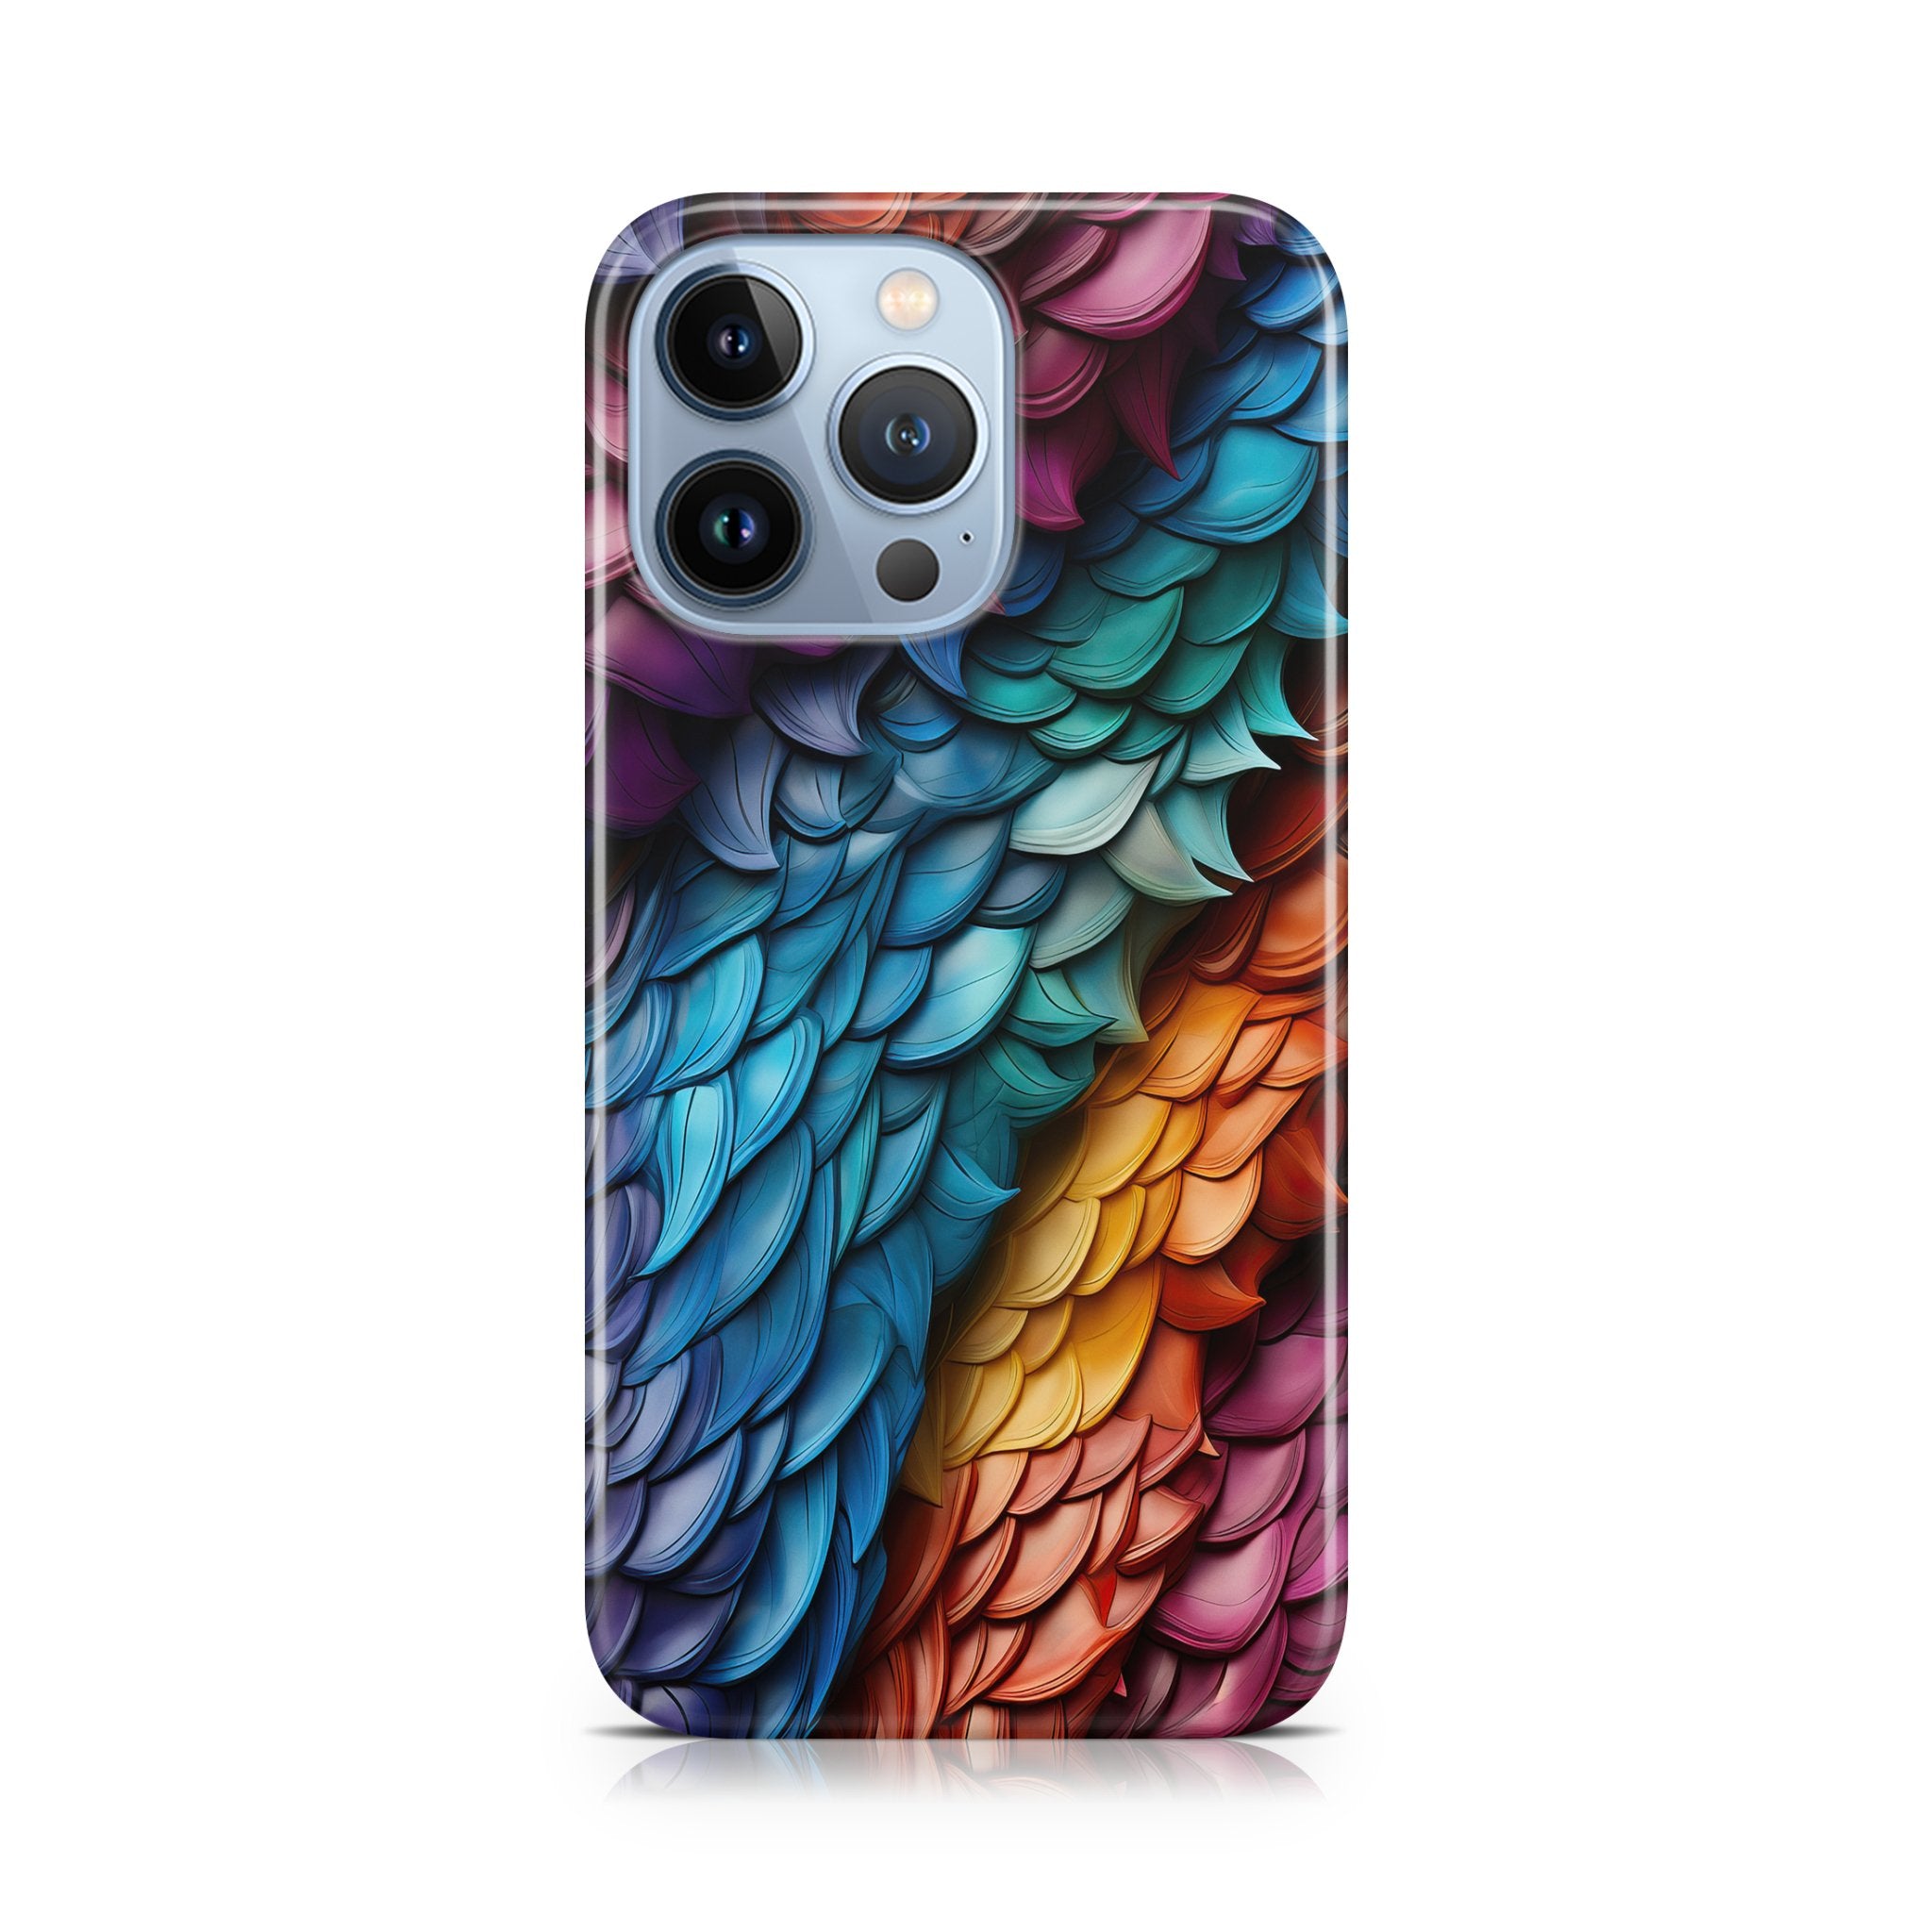 Rainbow Dragonscale - iPhone phone case designs by CaseSwagger